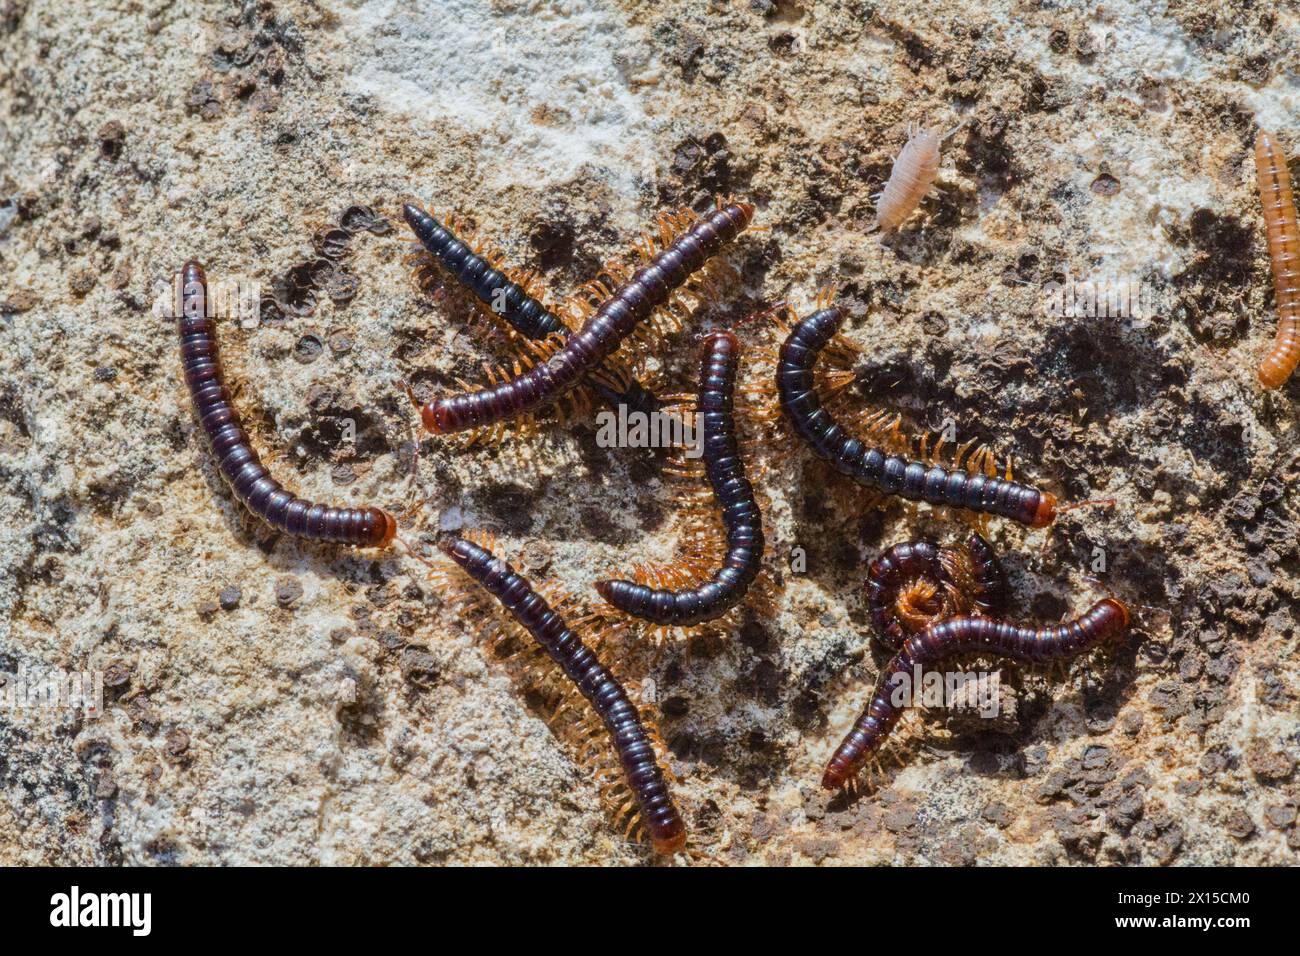 Archispirostreptus syriacus is a species of millipede within the family Spirostreptidae. The species is found distributed in the Middle East Stock Photo